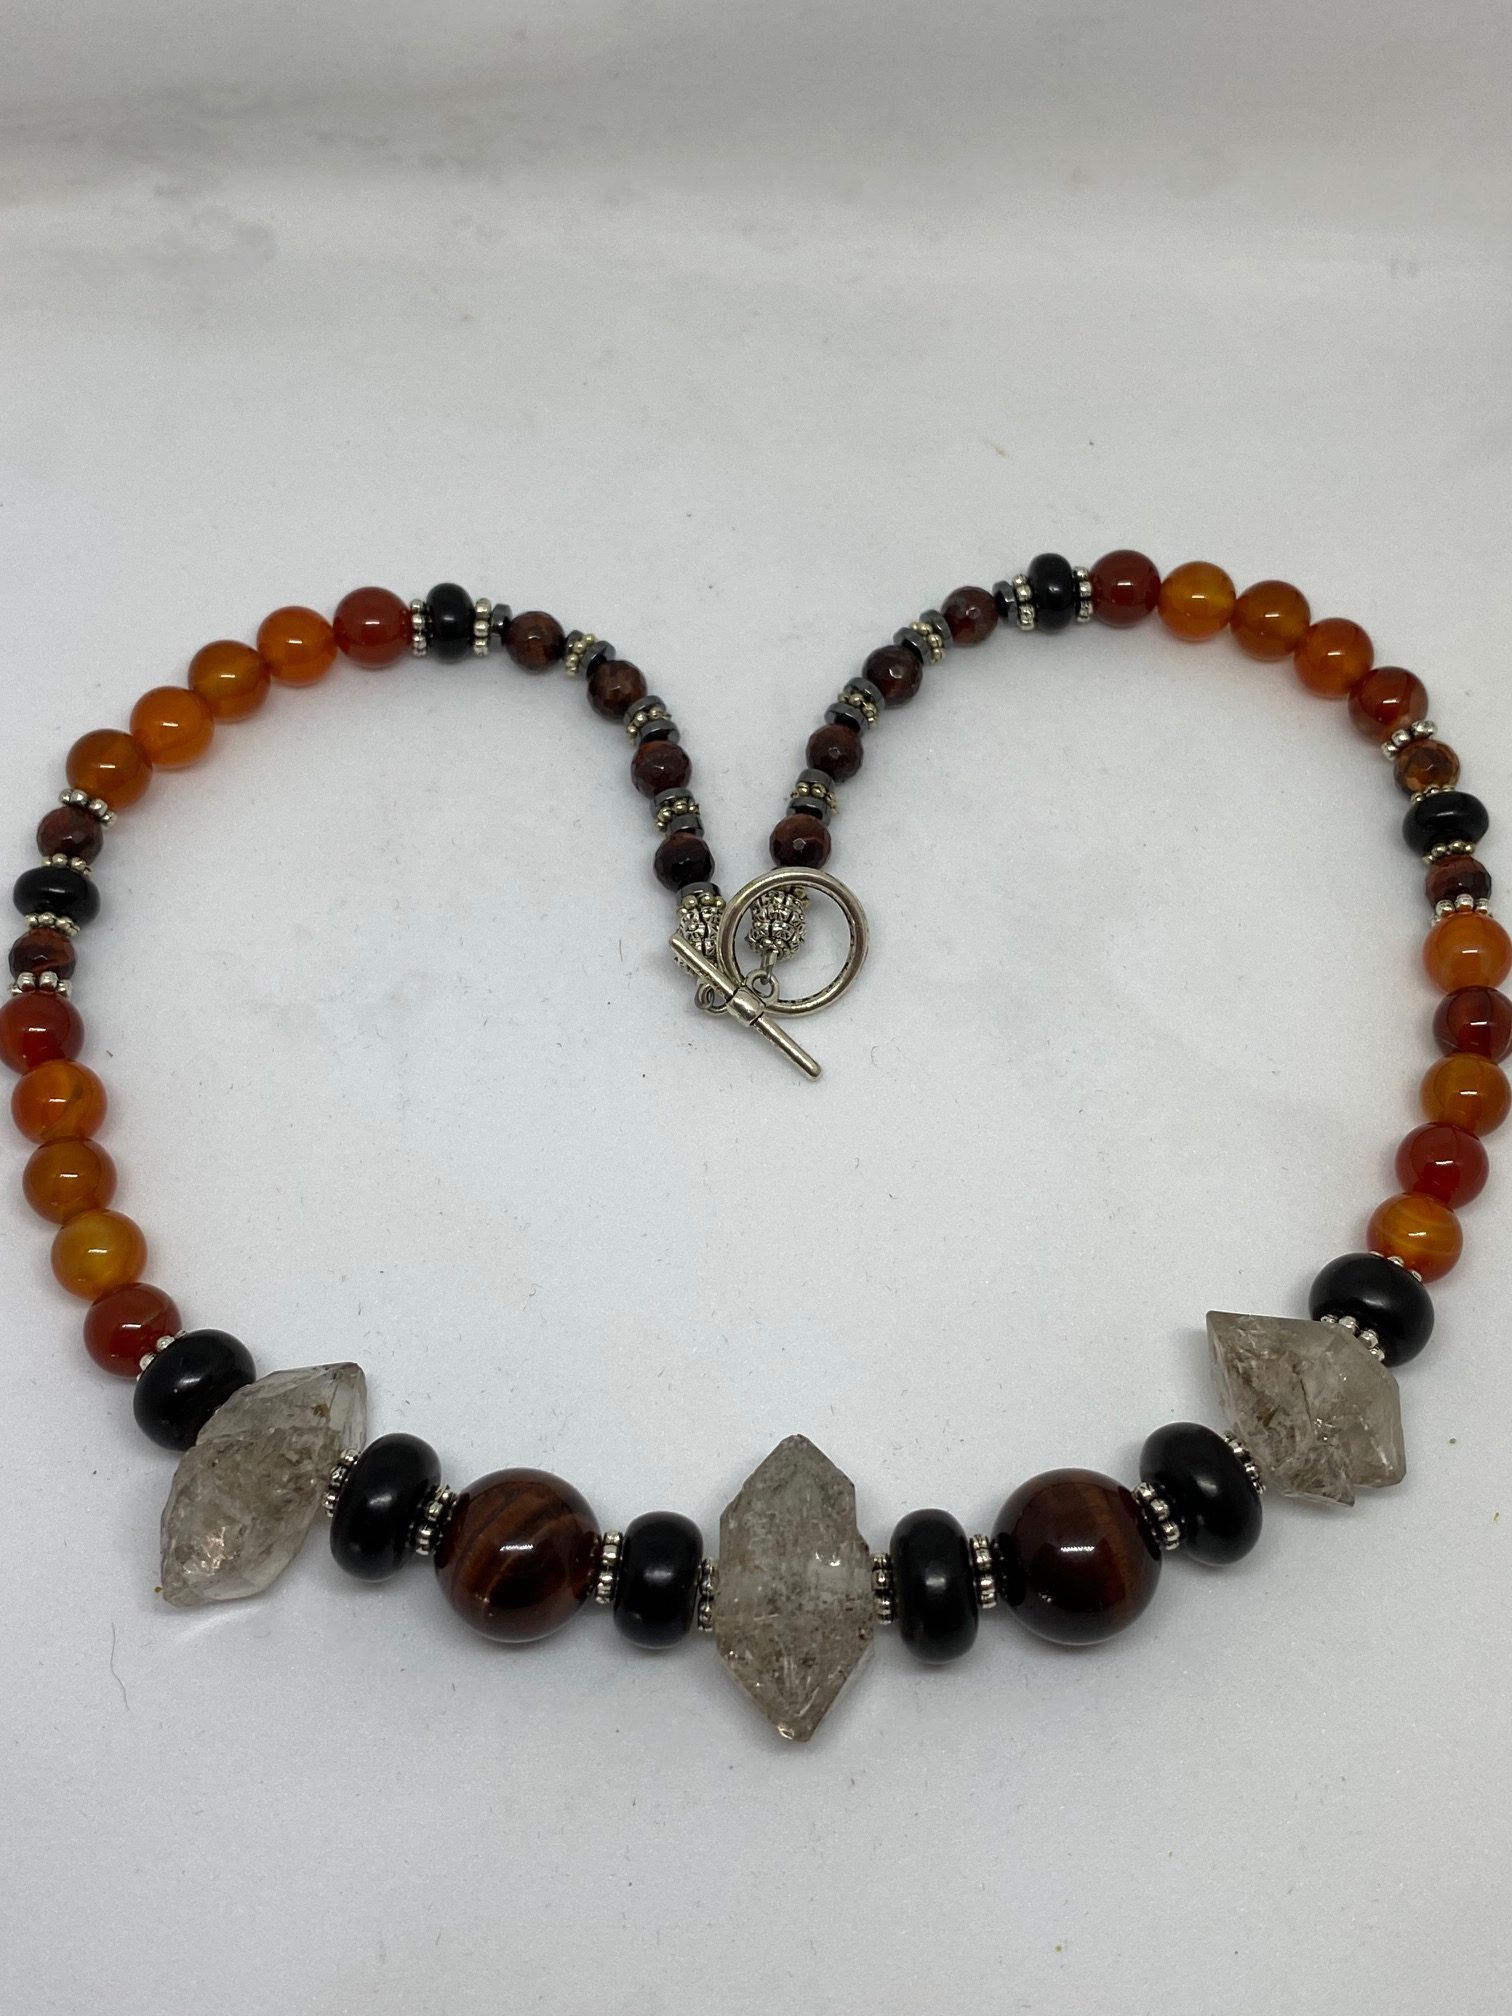 Red Tiger Eye, Herkimer Diamond, Jet, and Carnelian Necklace. This necklace promotes Happiness, Courage, Psychic Development, and Protection. 